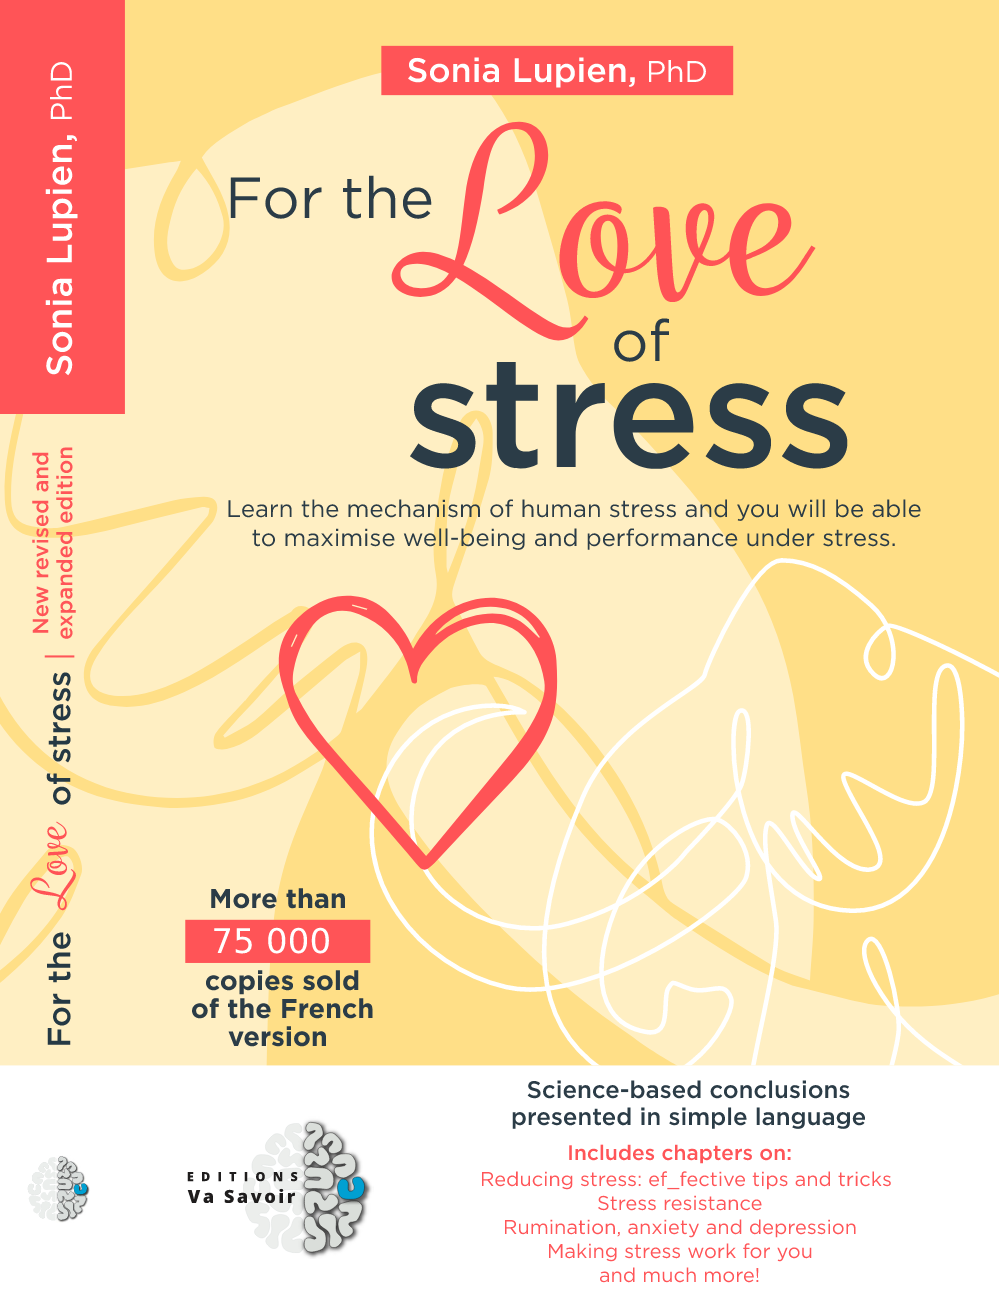 For The Love Of Stress Is Coming Soon!